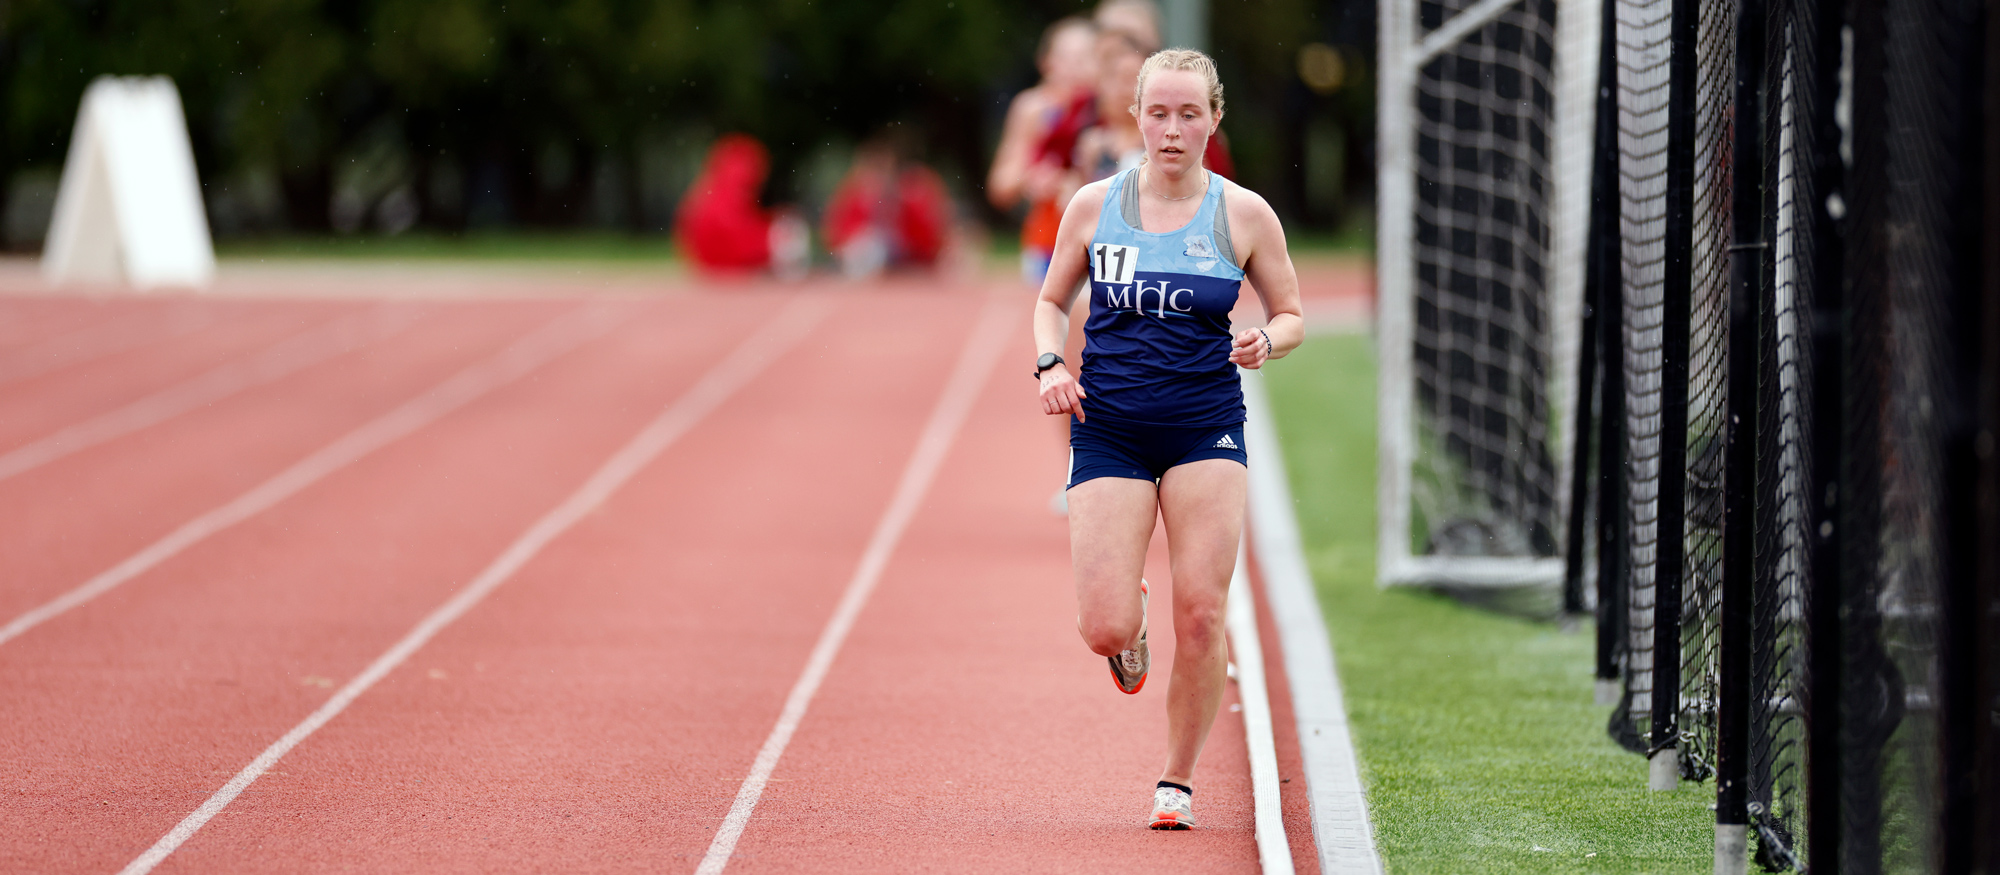 Bridget Hall raced to eighth place in the 10,000 meters at the NEWMAC Track & Field Championships at MIT on April 29, 2023. (Frank Poulin / Courtesy MIT)